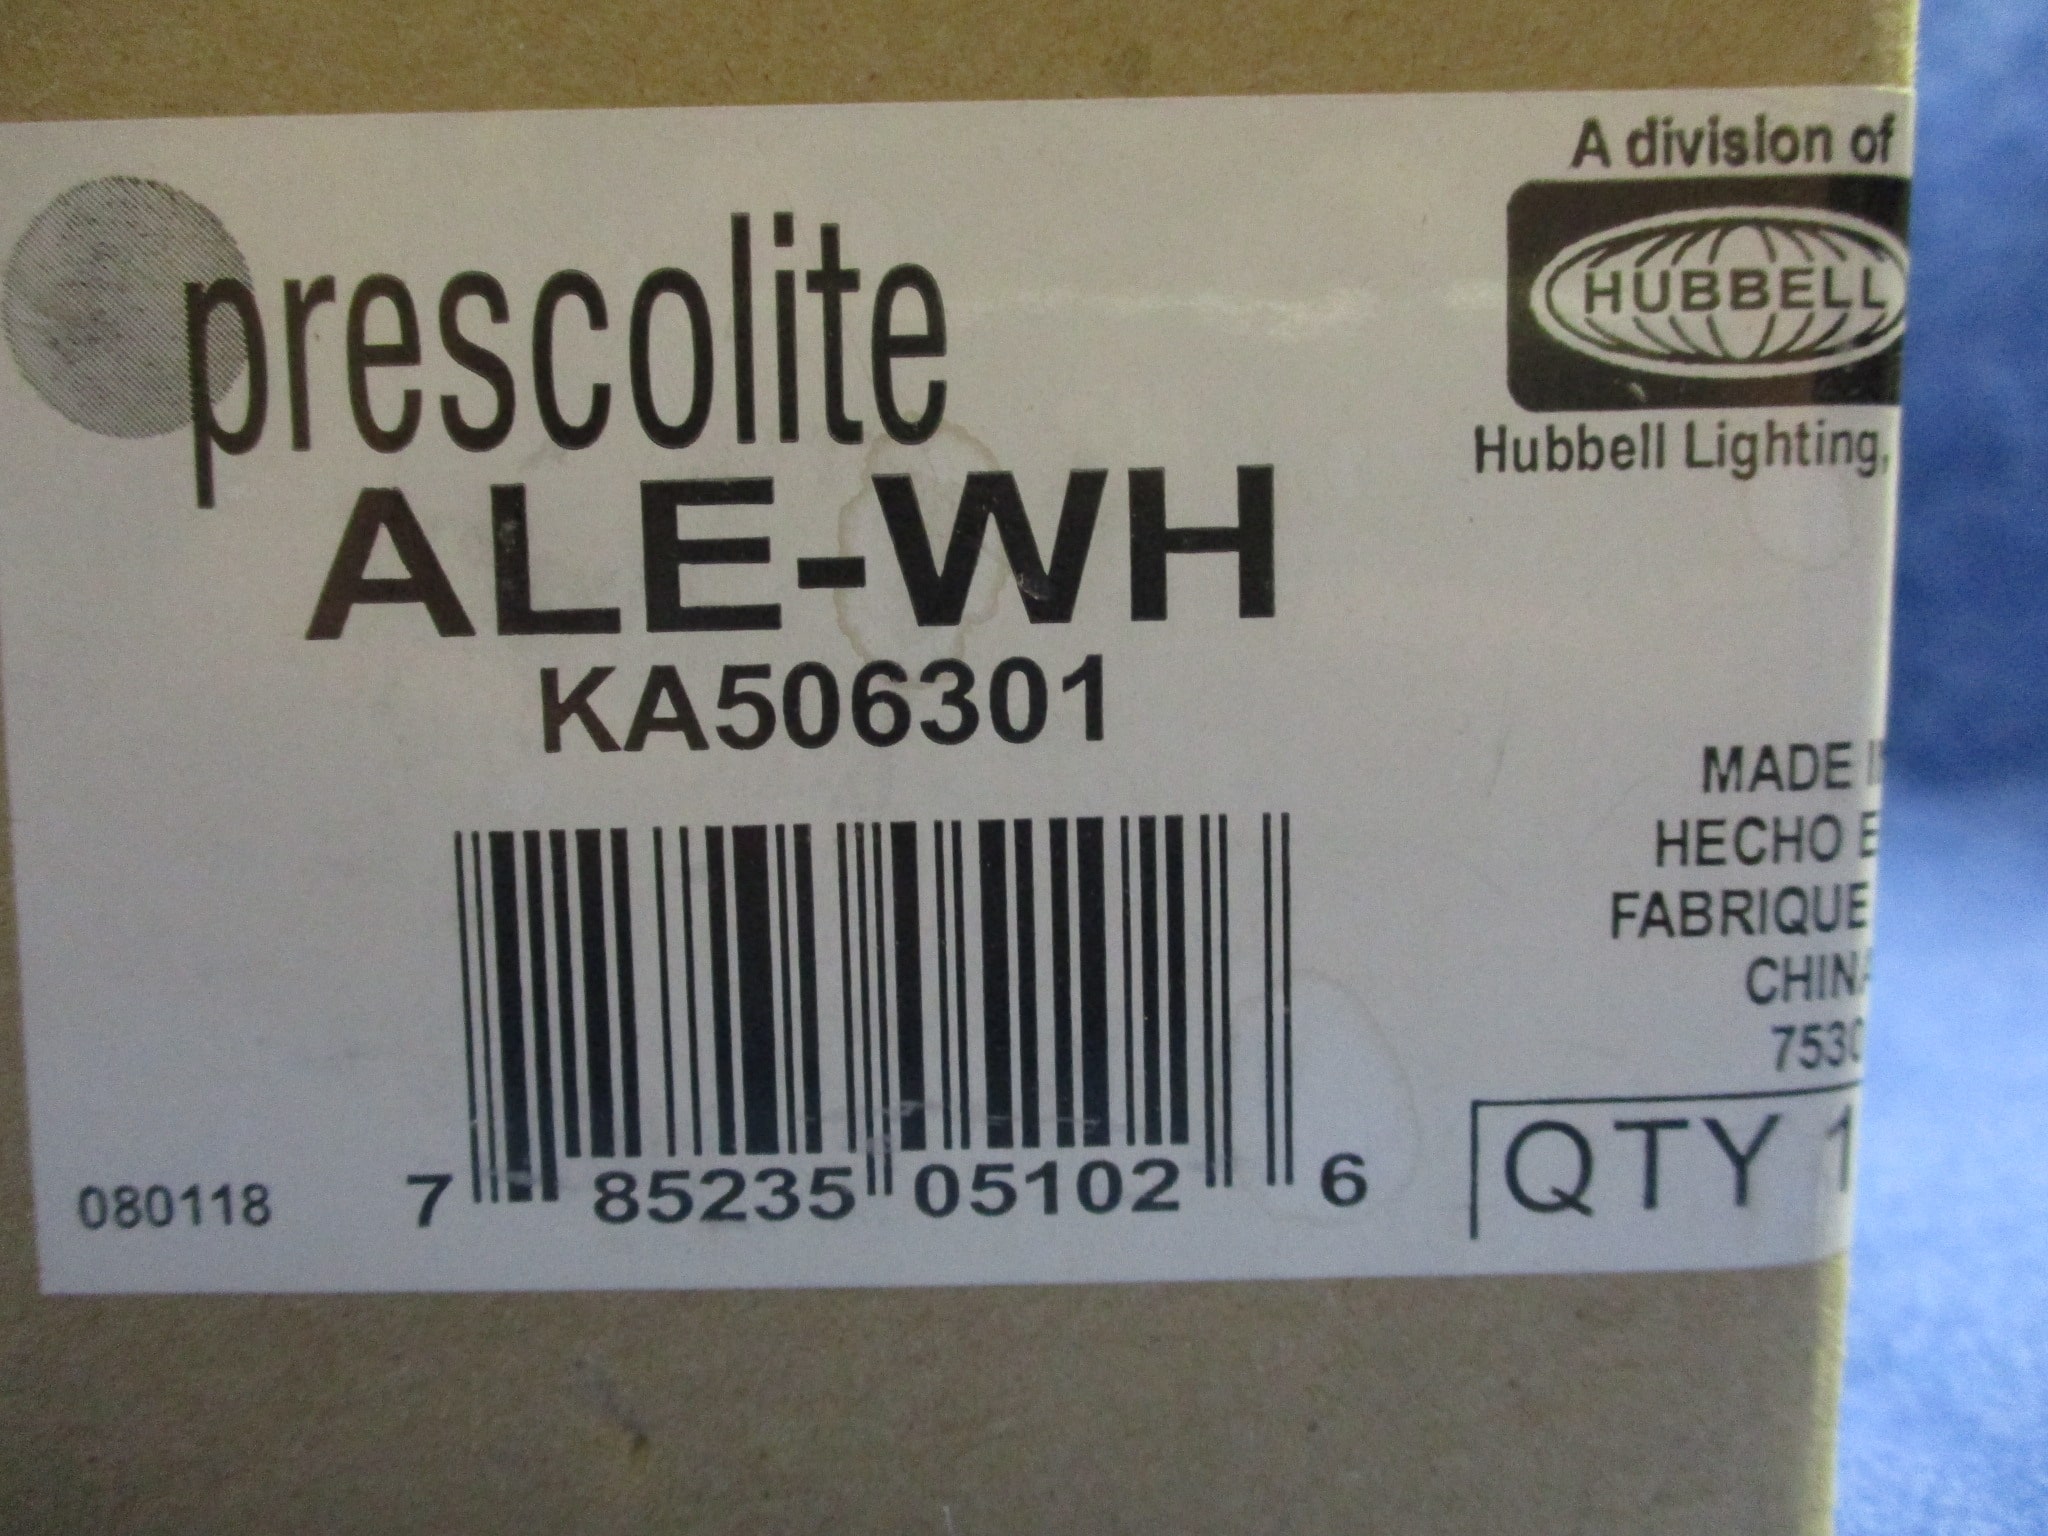 Hubbell Lighting Division Prescolite ALE-WH KA506301 1 Year Warranty